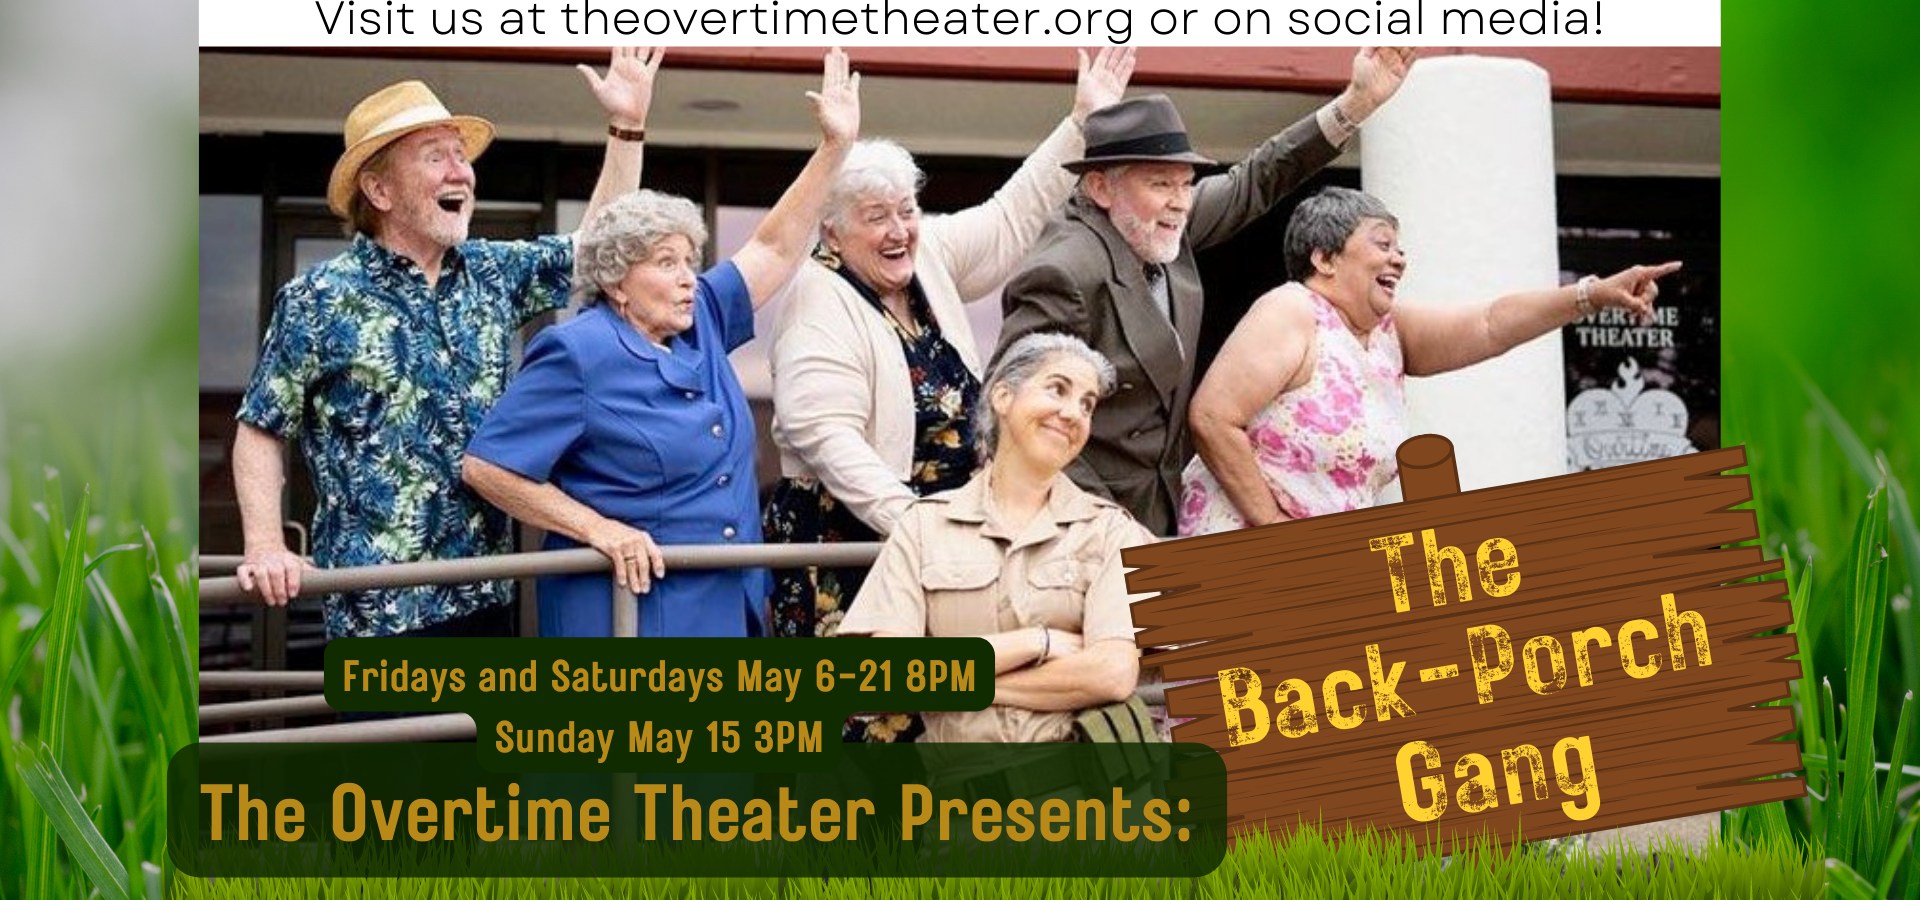 The Back-Porch Gang by Overtime Theater